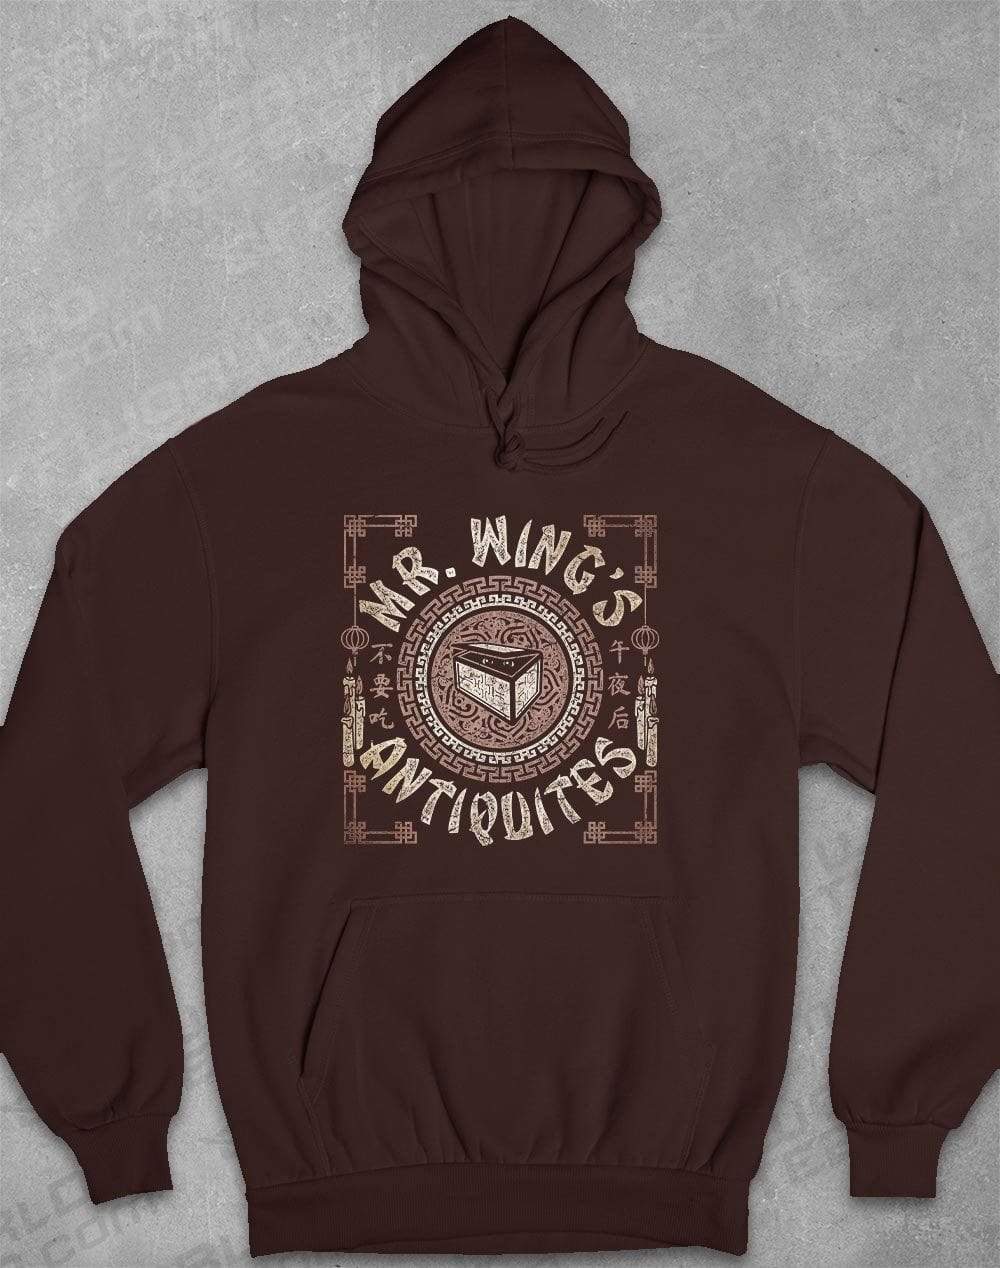 Mr Wing's Antiquites Hoodie XS / Hot Chocolate  - Off World Tees